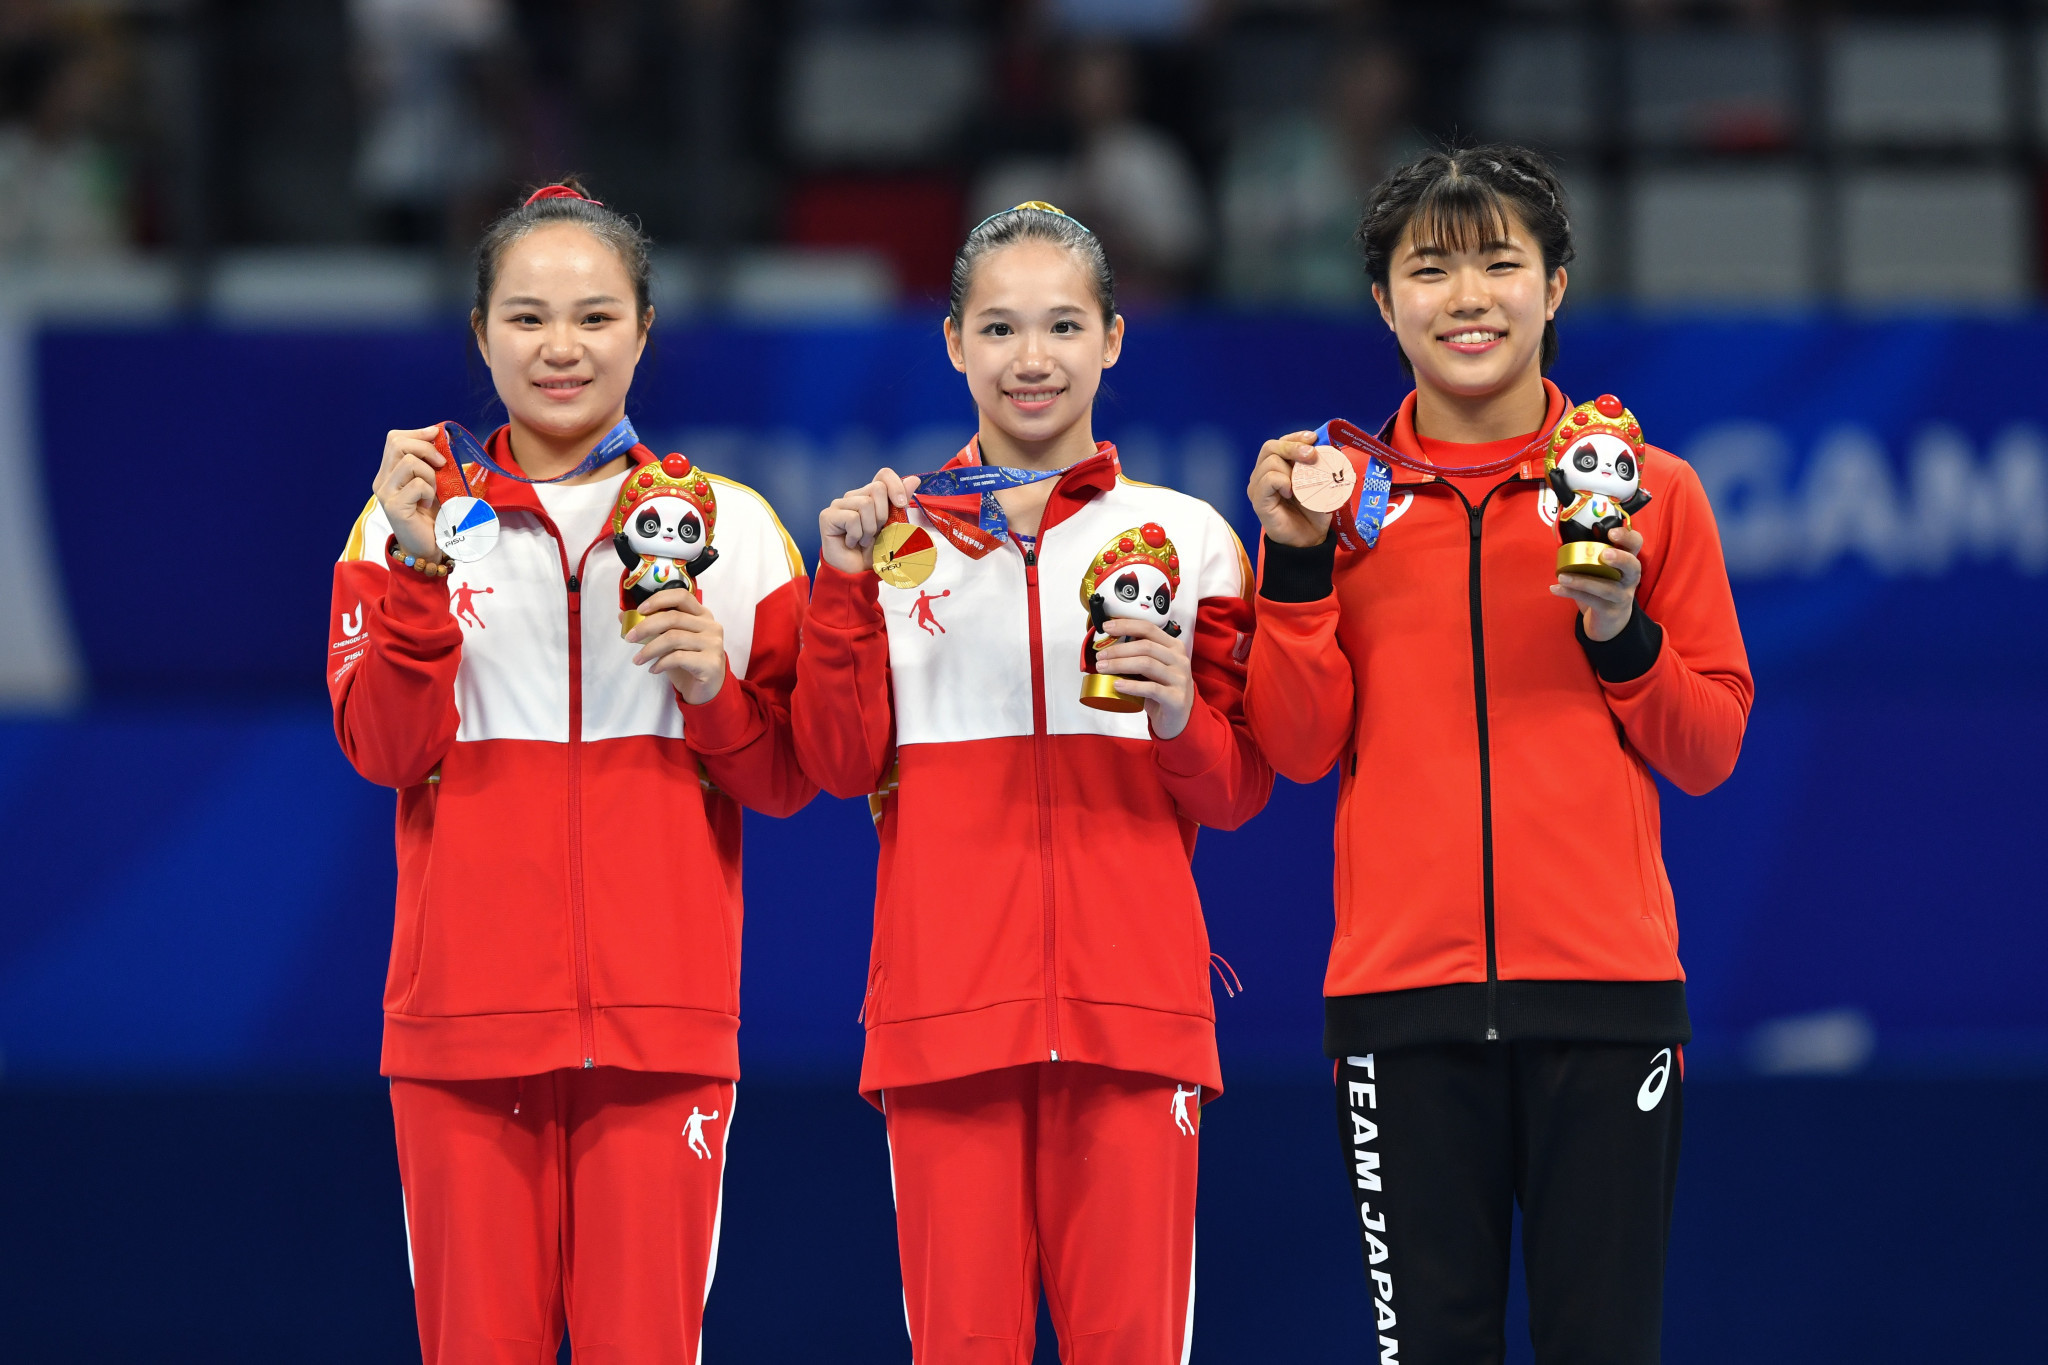 China’s Ou Yushan, centre, stands at the top of the women's balance beam podium ©Chengdu 2021